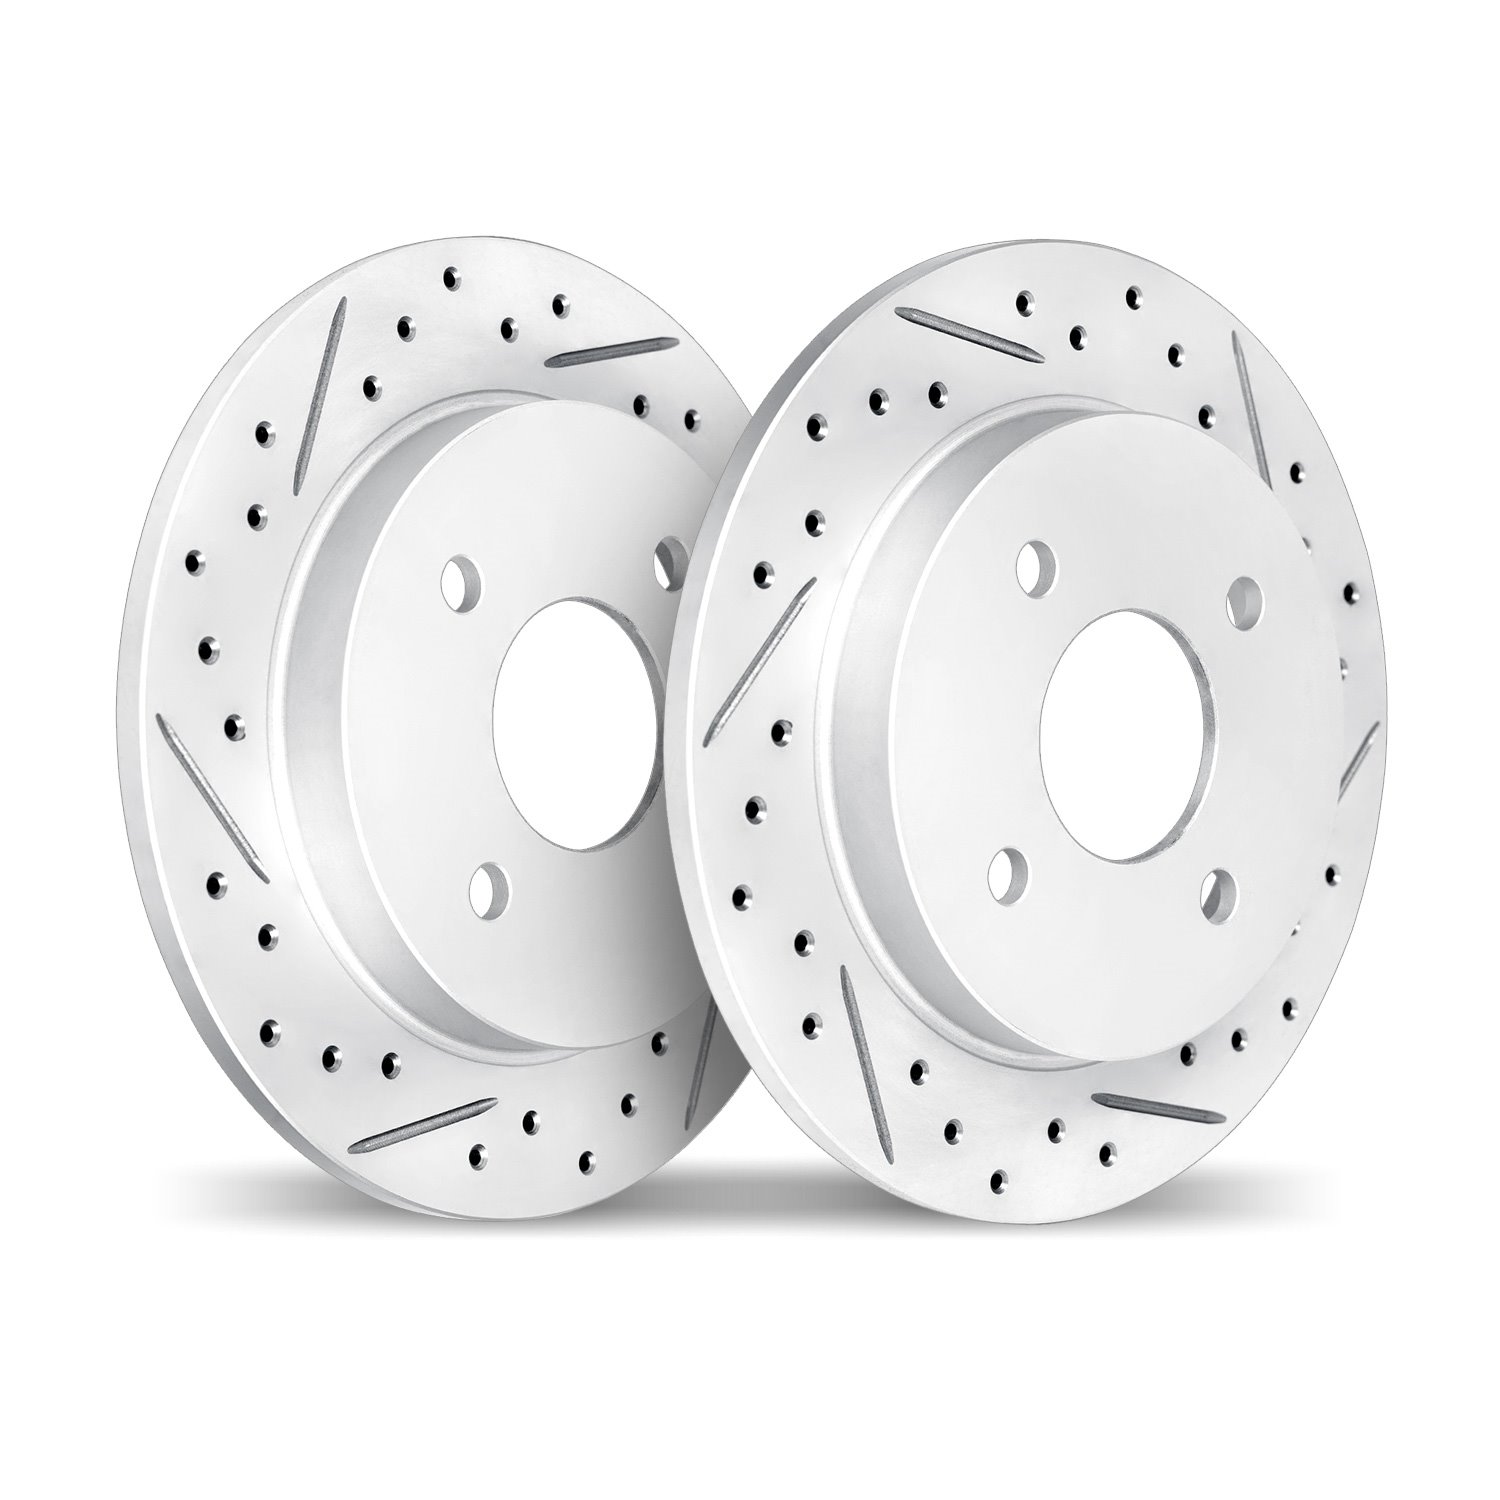 2002-47044 Geoperformance Drilled/Slotted Brake Rotors, 2014-2016 GM, Position: Rear